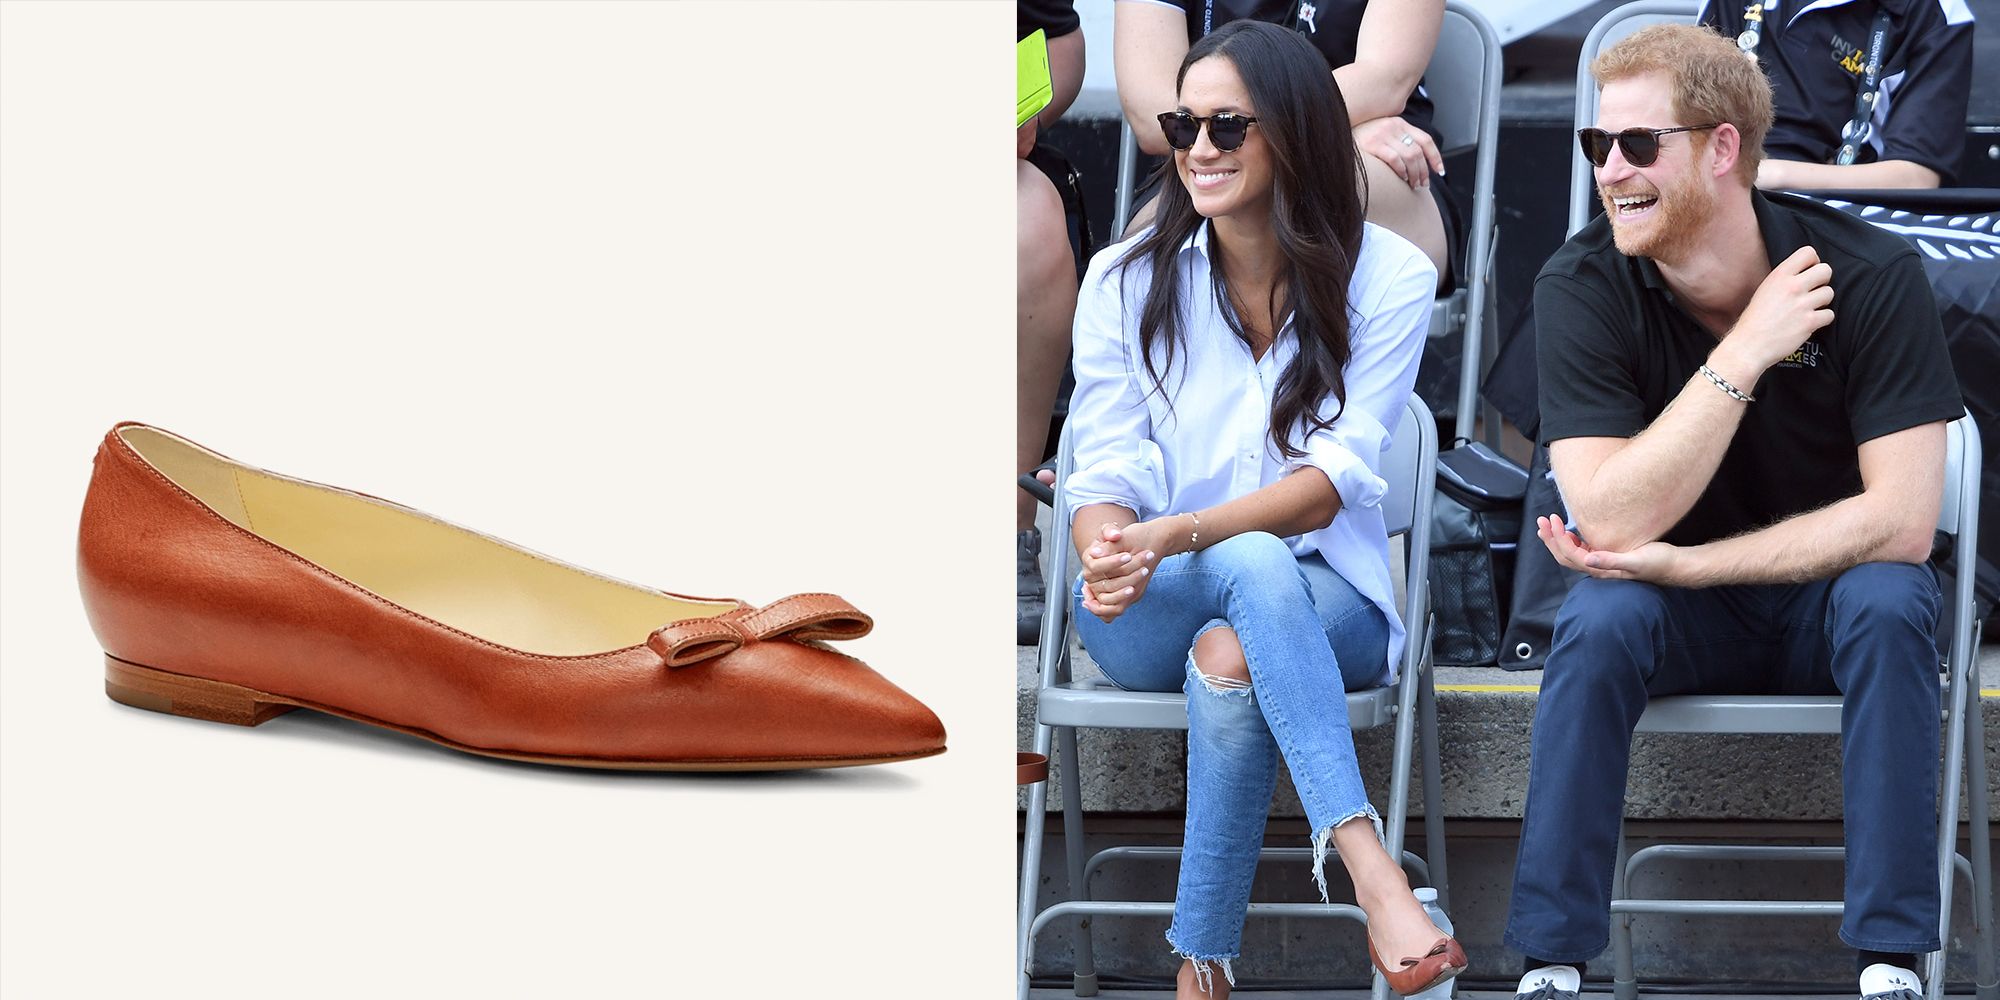 business casual flats with support